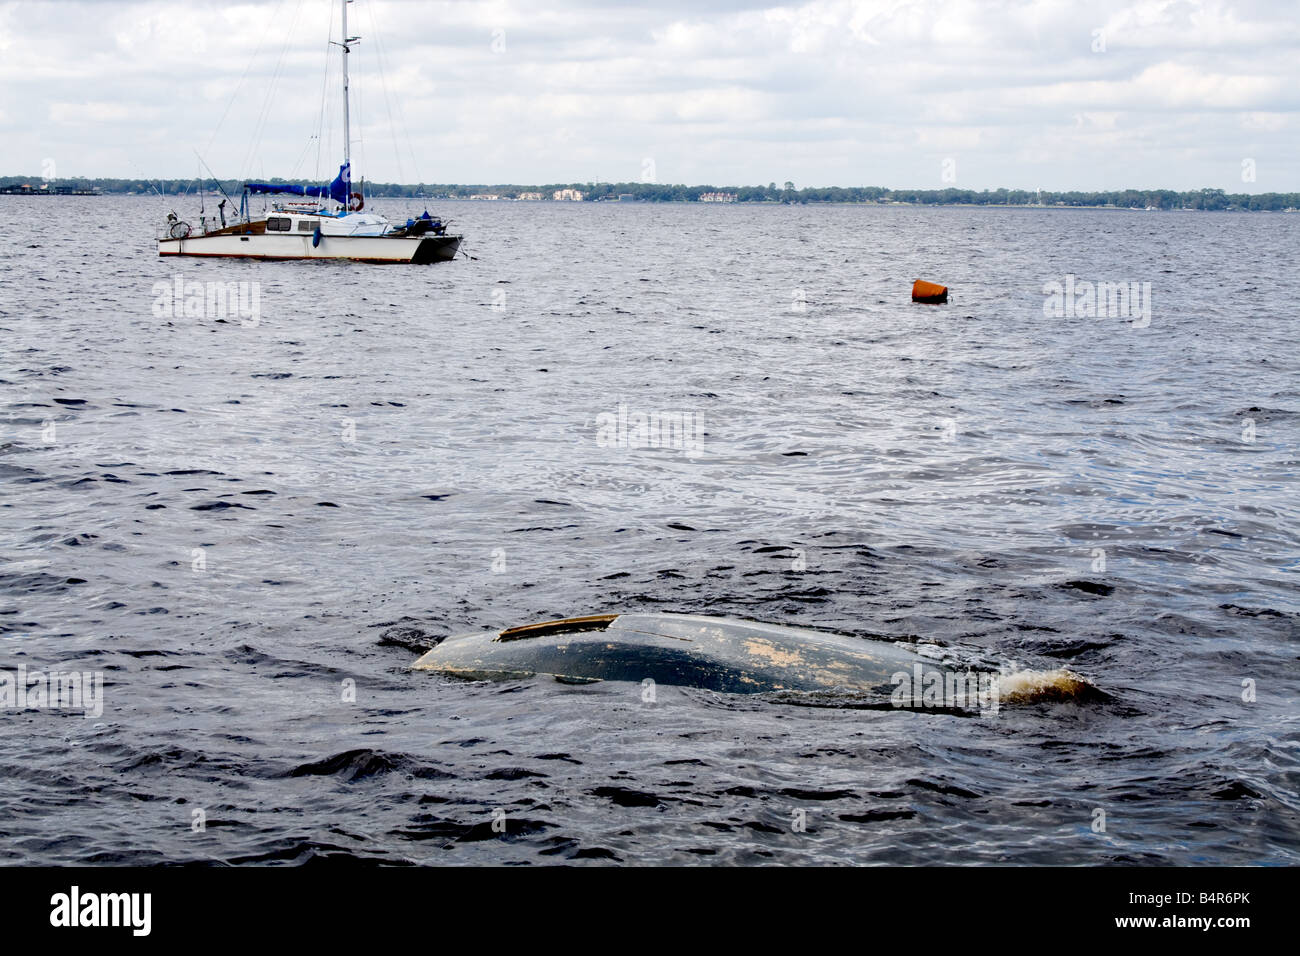 Bottom of a sunken boat almost underwater on a lake with a small sailboat in the background Stock Photo